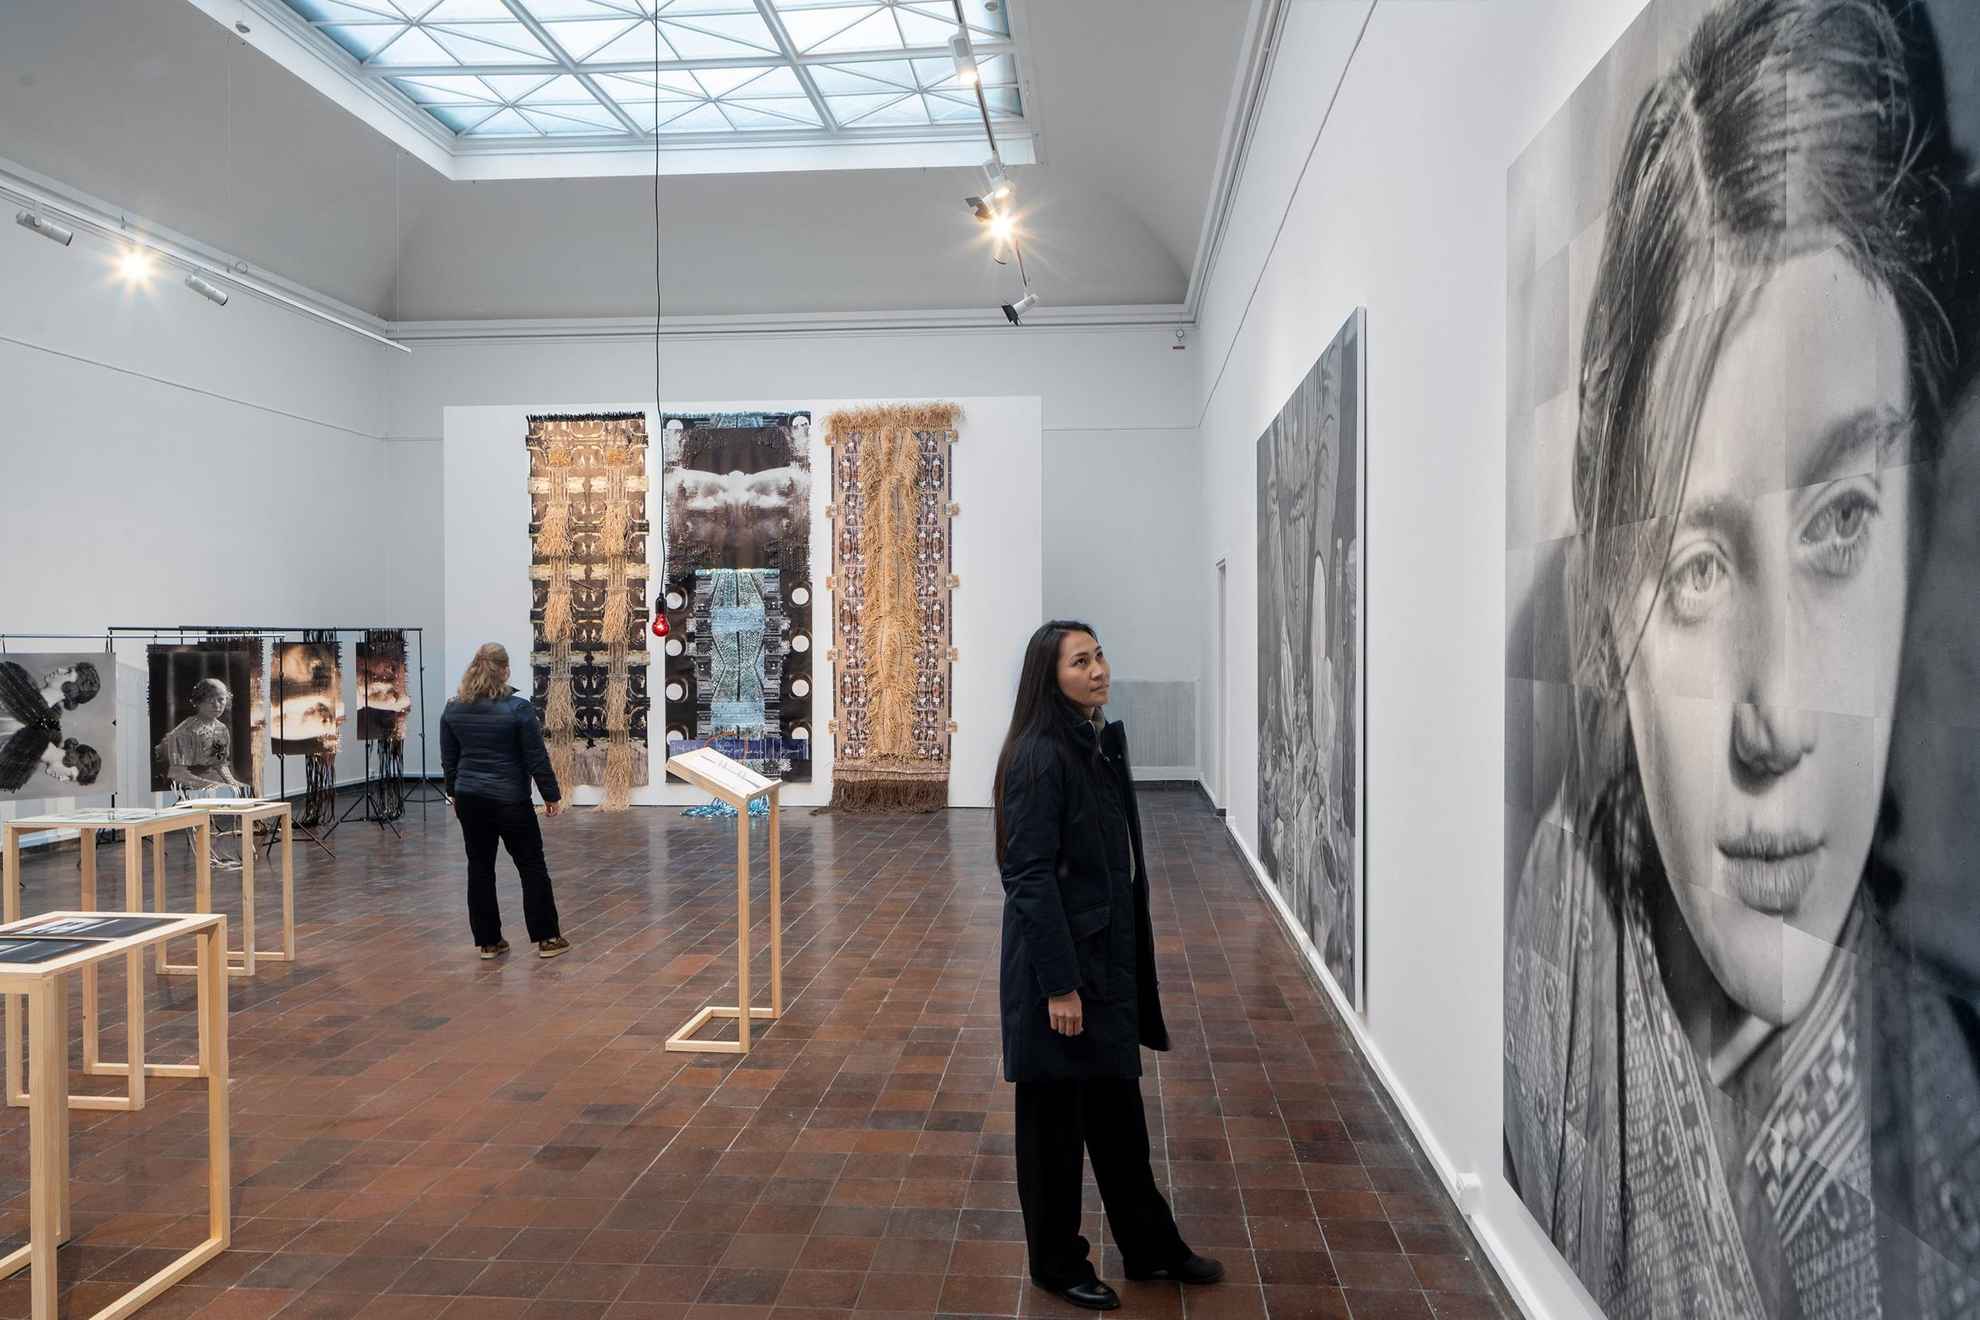 An installation at an exhibition. A woman looking at a large black and white image of a woman and in the background a woman is looking at a large artwork with photographs braided together with fragments into new structures.